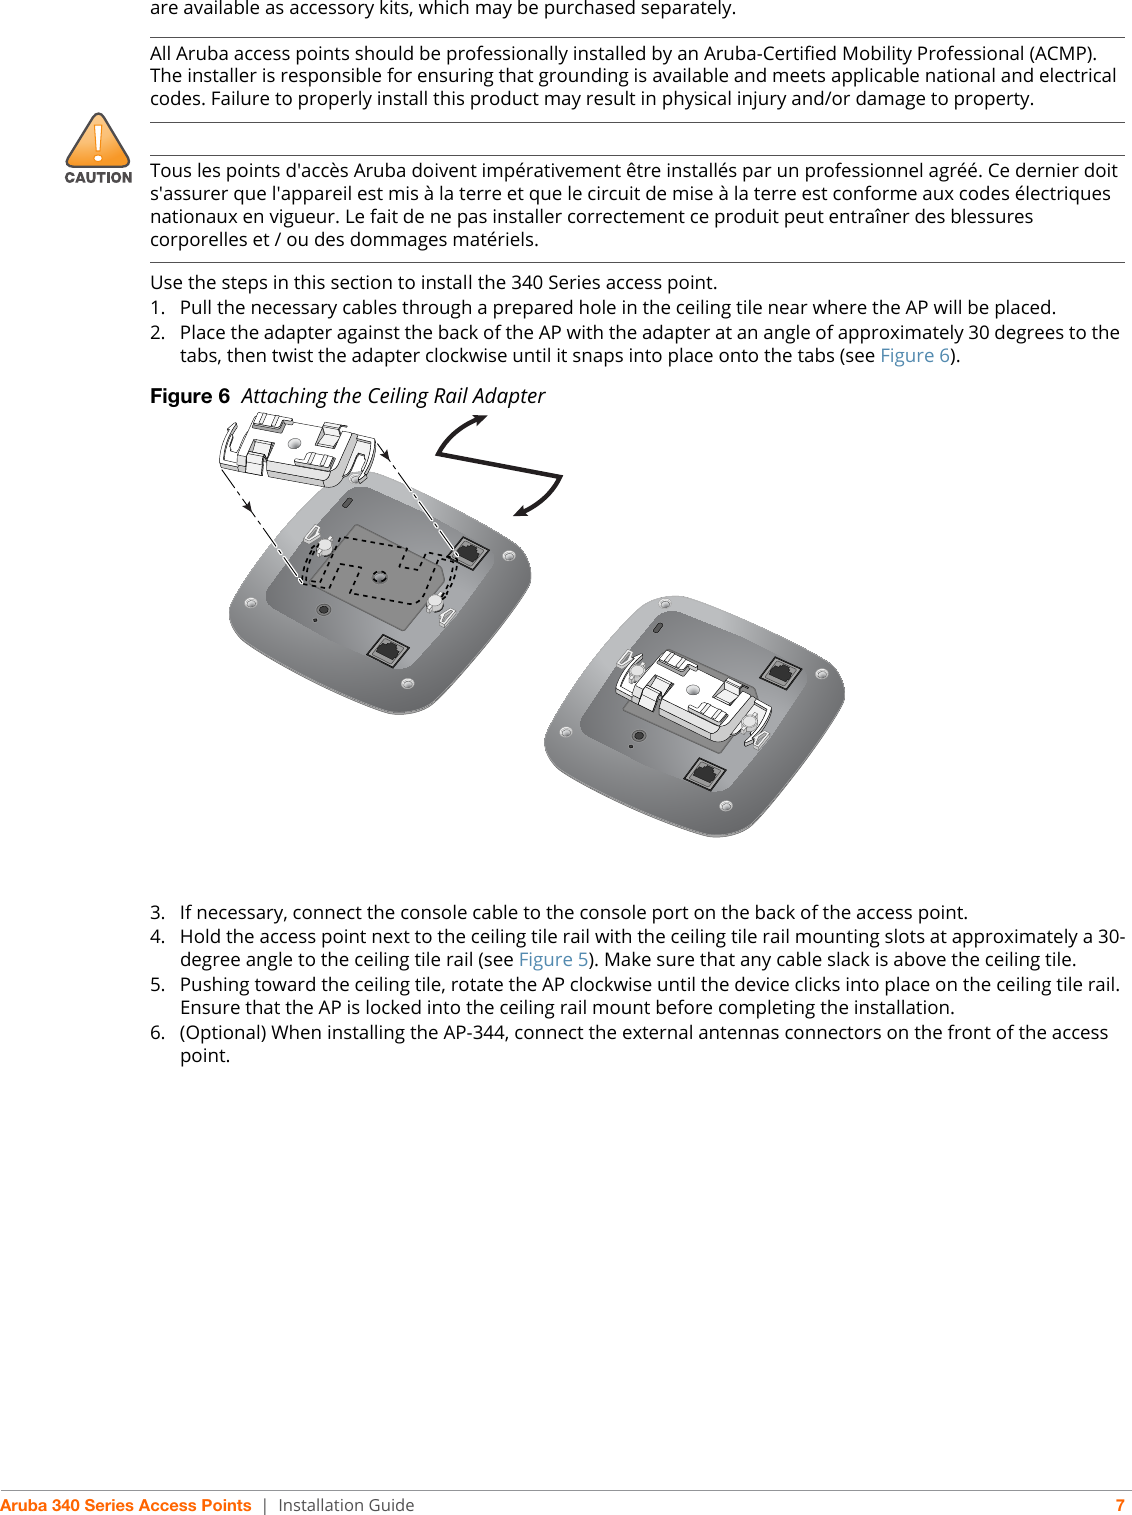 Aruba 340 Series Access Points | Installation Guide 7are available as accessory kits, which may be purchased separately. Use the steps in this section to install the 340 Series access point.1. Pull the necessary cables through a prepared hole in the ceiling tile near where the AP will be placed.2. Place the adapter against the back of the AP with the adapter at an angle of approximately 30 degrees to the tabs, then twist the adapter clockwise until it snaps into place onto the tabs (see Figure 6).Figure 6  Attaching the Ceiling Rail Adapter3. If necessary, connect the console cable to the console port on the back of the access point.4. Hold the access point next to the ceiling tile rail with the ceiling tile rail mounting slots at approximately a 30-degree angle to the ceiling tile rail (see Figure 5). Make sure that any cable slack is above the ceiling tile.5. Pushing toward the ceiling tile, rotate the AP clockwise until the device clicks into place on the ceiling tile rail. Ensure that the AP is locked into the ceiling rail mount before completing the installation.6. (Optional) When installing the AP-344, connect the external antennas connectors on the front of the access point.!All Aruba access points should be professionally installed by an Aruba-Certified Mobility Professional (ACMP). The installer is responsible for ensuring that grounding is available and meets applicable national and electrical codes. Failure to properly install this product may result in physical injury and/or damage to property.Tous les points d&apos;accès Aruba doivent impérativement être installés par un professionnel agréé. Ce dernier doit s&apos;assurer que l&apos;appareil est mis à la terre et que le circuit de mise à la terre est conforme aux codes électriques nationaux en vigueur. Le fait de ne pas installer correctement ce produit peut entraîner des blessures corporelles et / ou des dommages matériels.